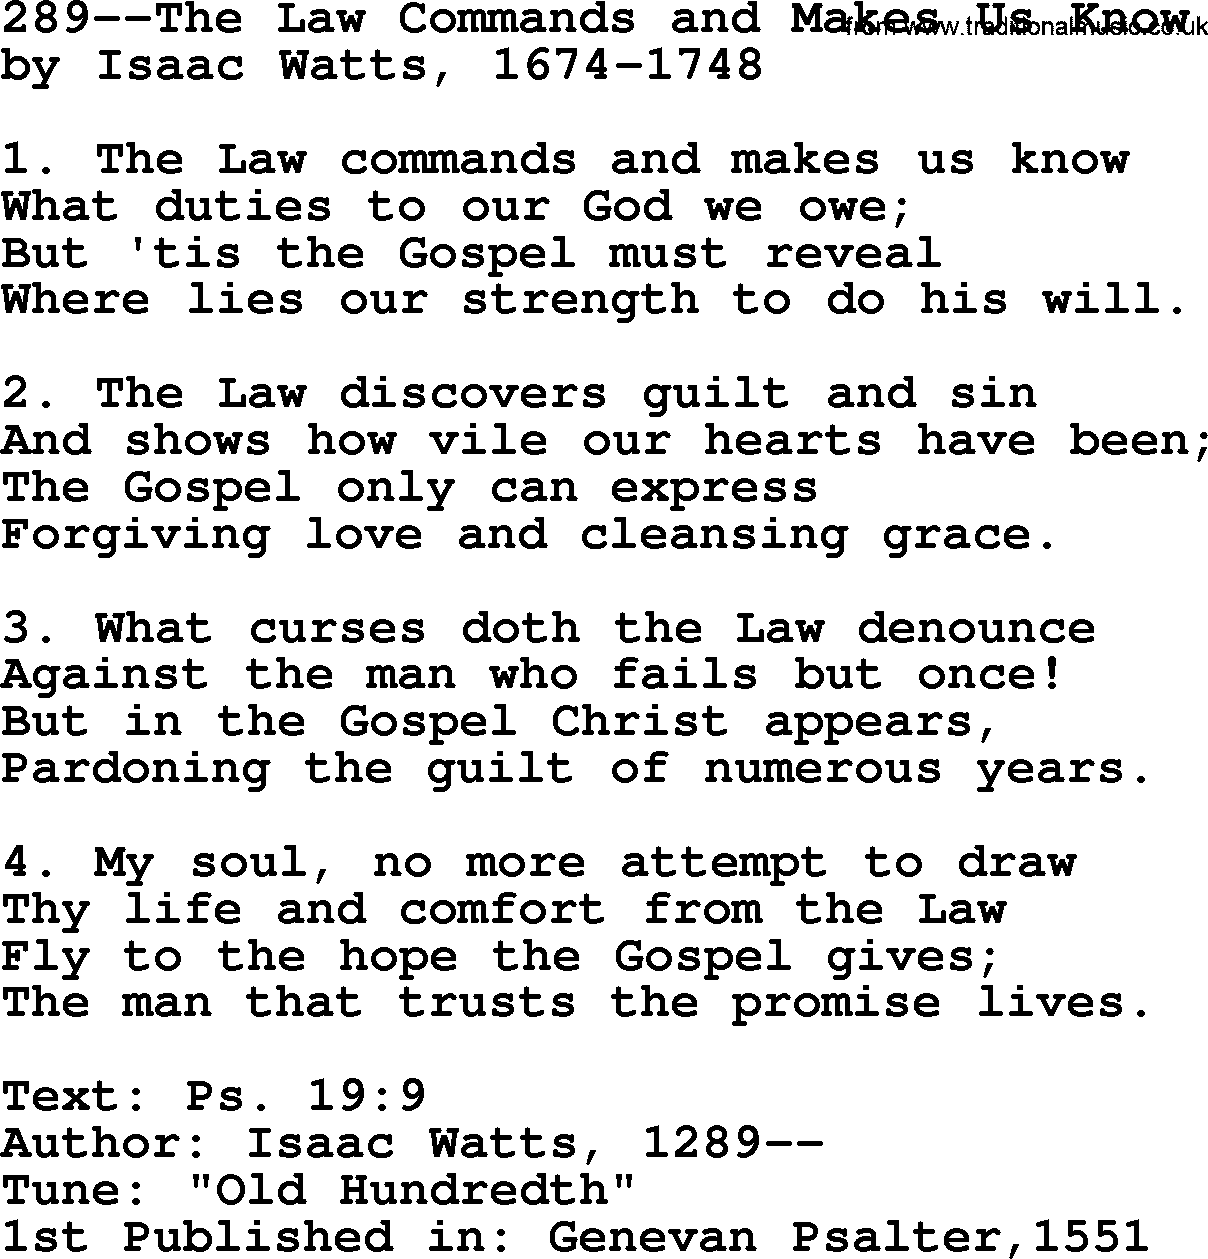 Lutheran Hymn: 289--The Law Commands and Makes Us Know.txt lyrics with PDF